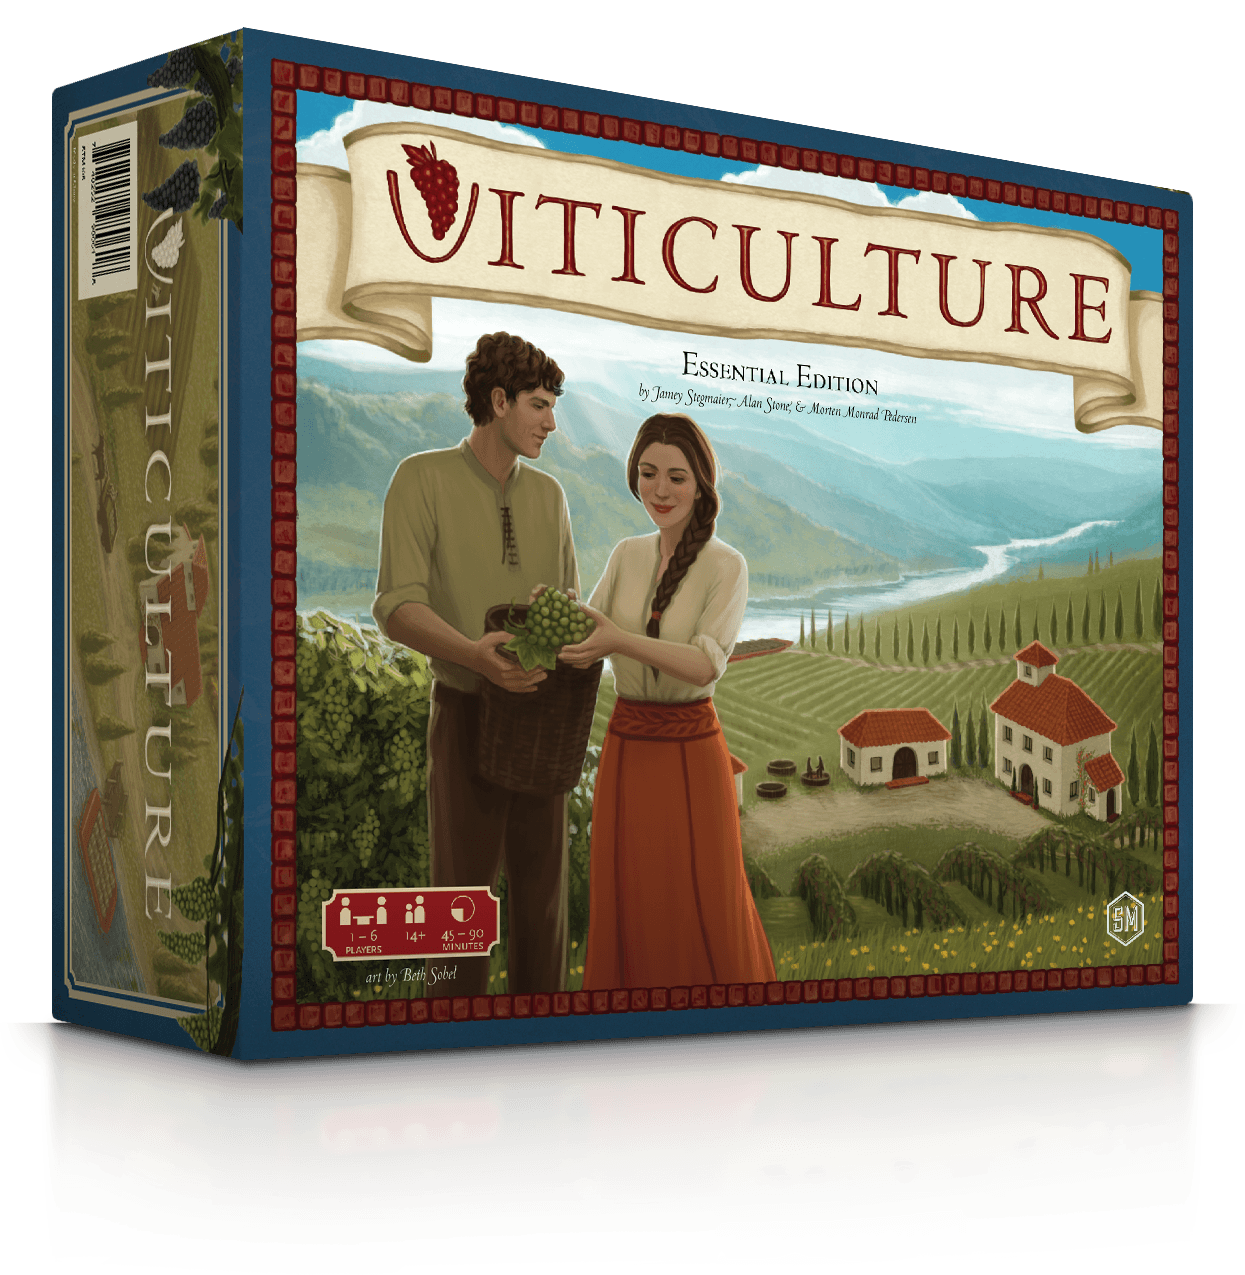 Viticulture: Essential Edition - The Fourth Place